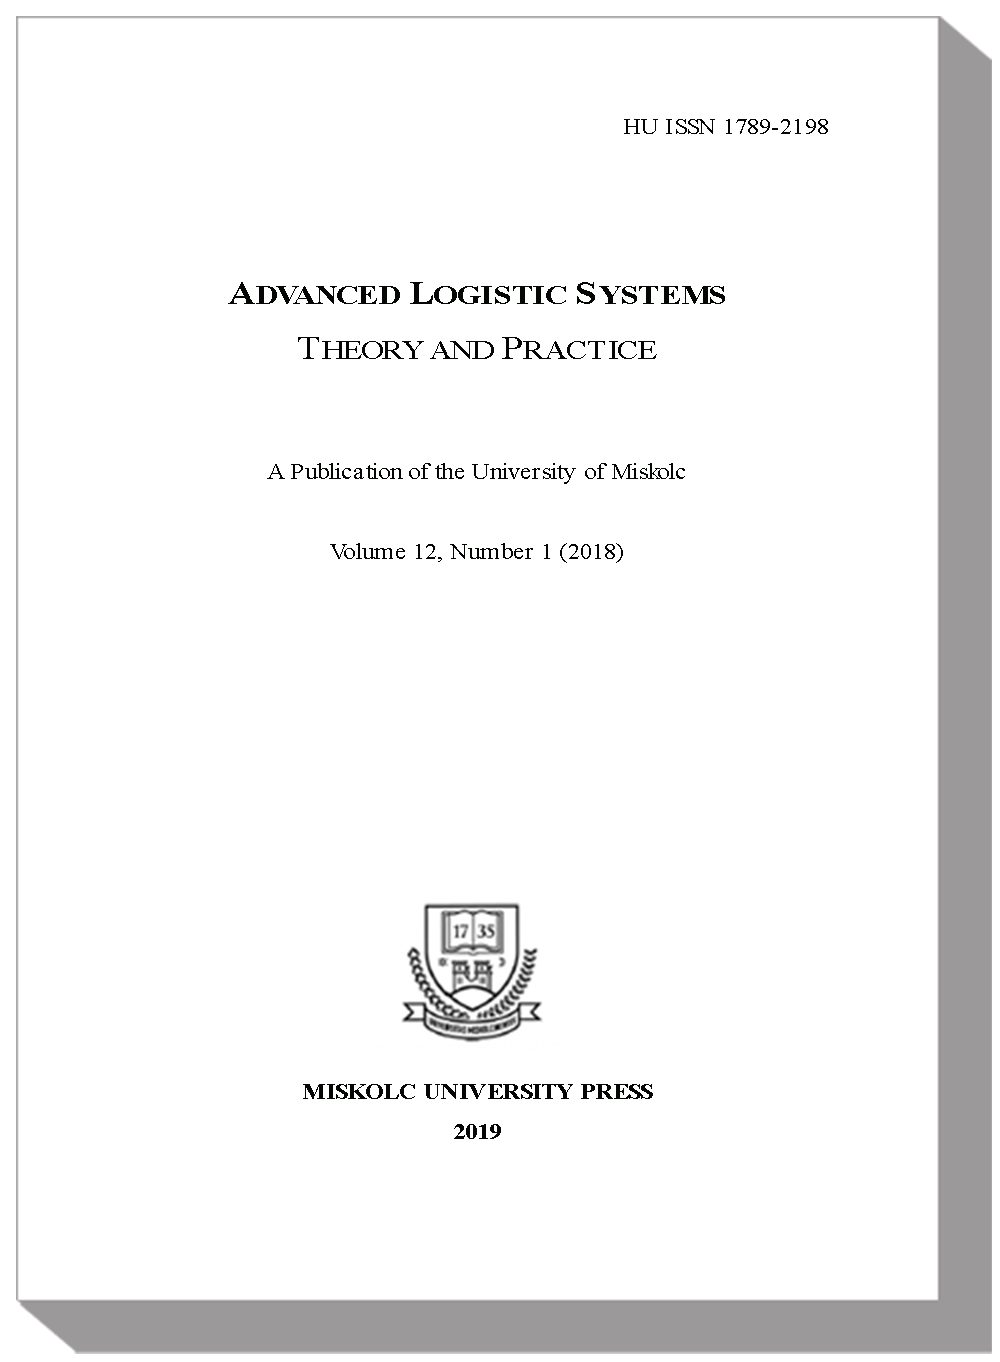 					View Vol. 12 No. 1 (2018): Advanced Logistic Systems - Theory and Practice
				